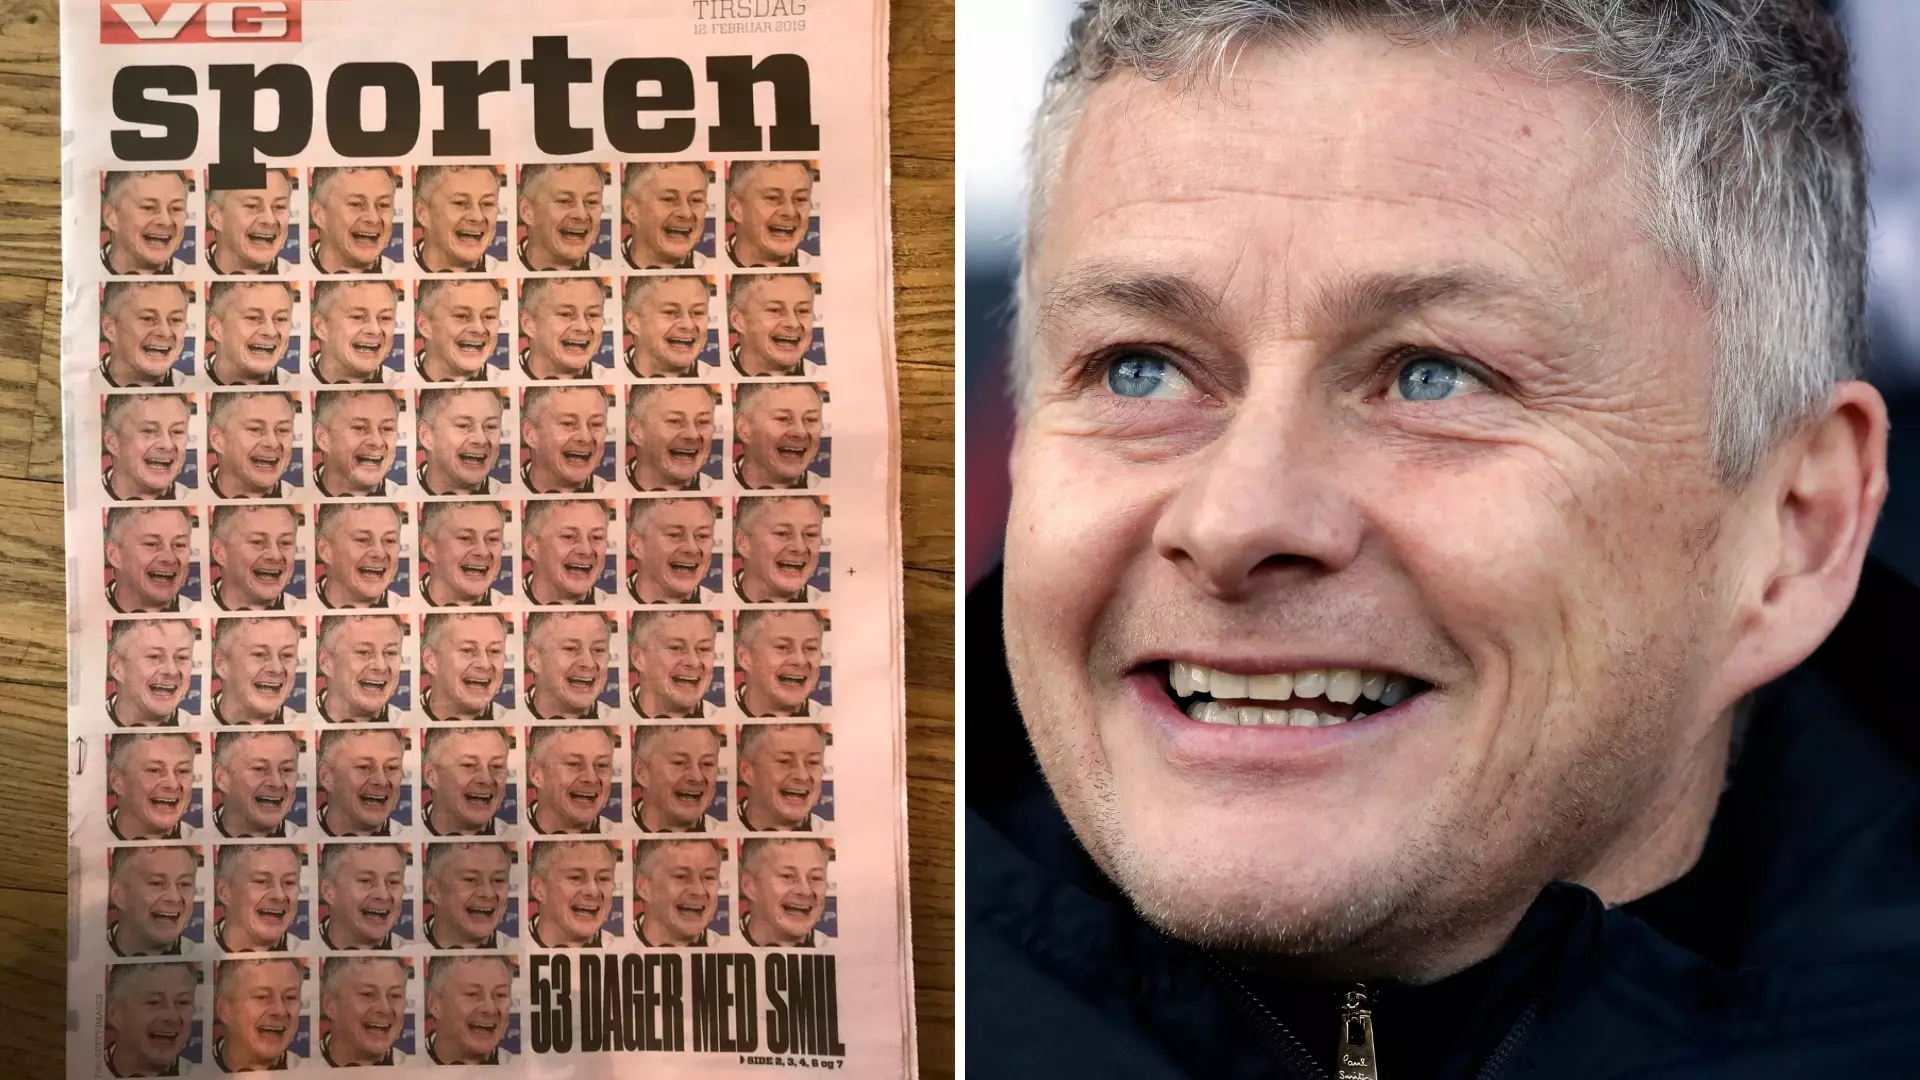 Norwegian Newspaper Has Gone Ole Gunnar Solskjær Crazy With Amazing Front-Page Story